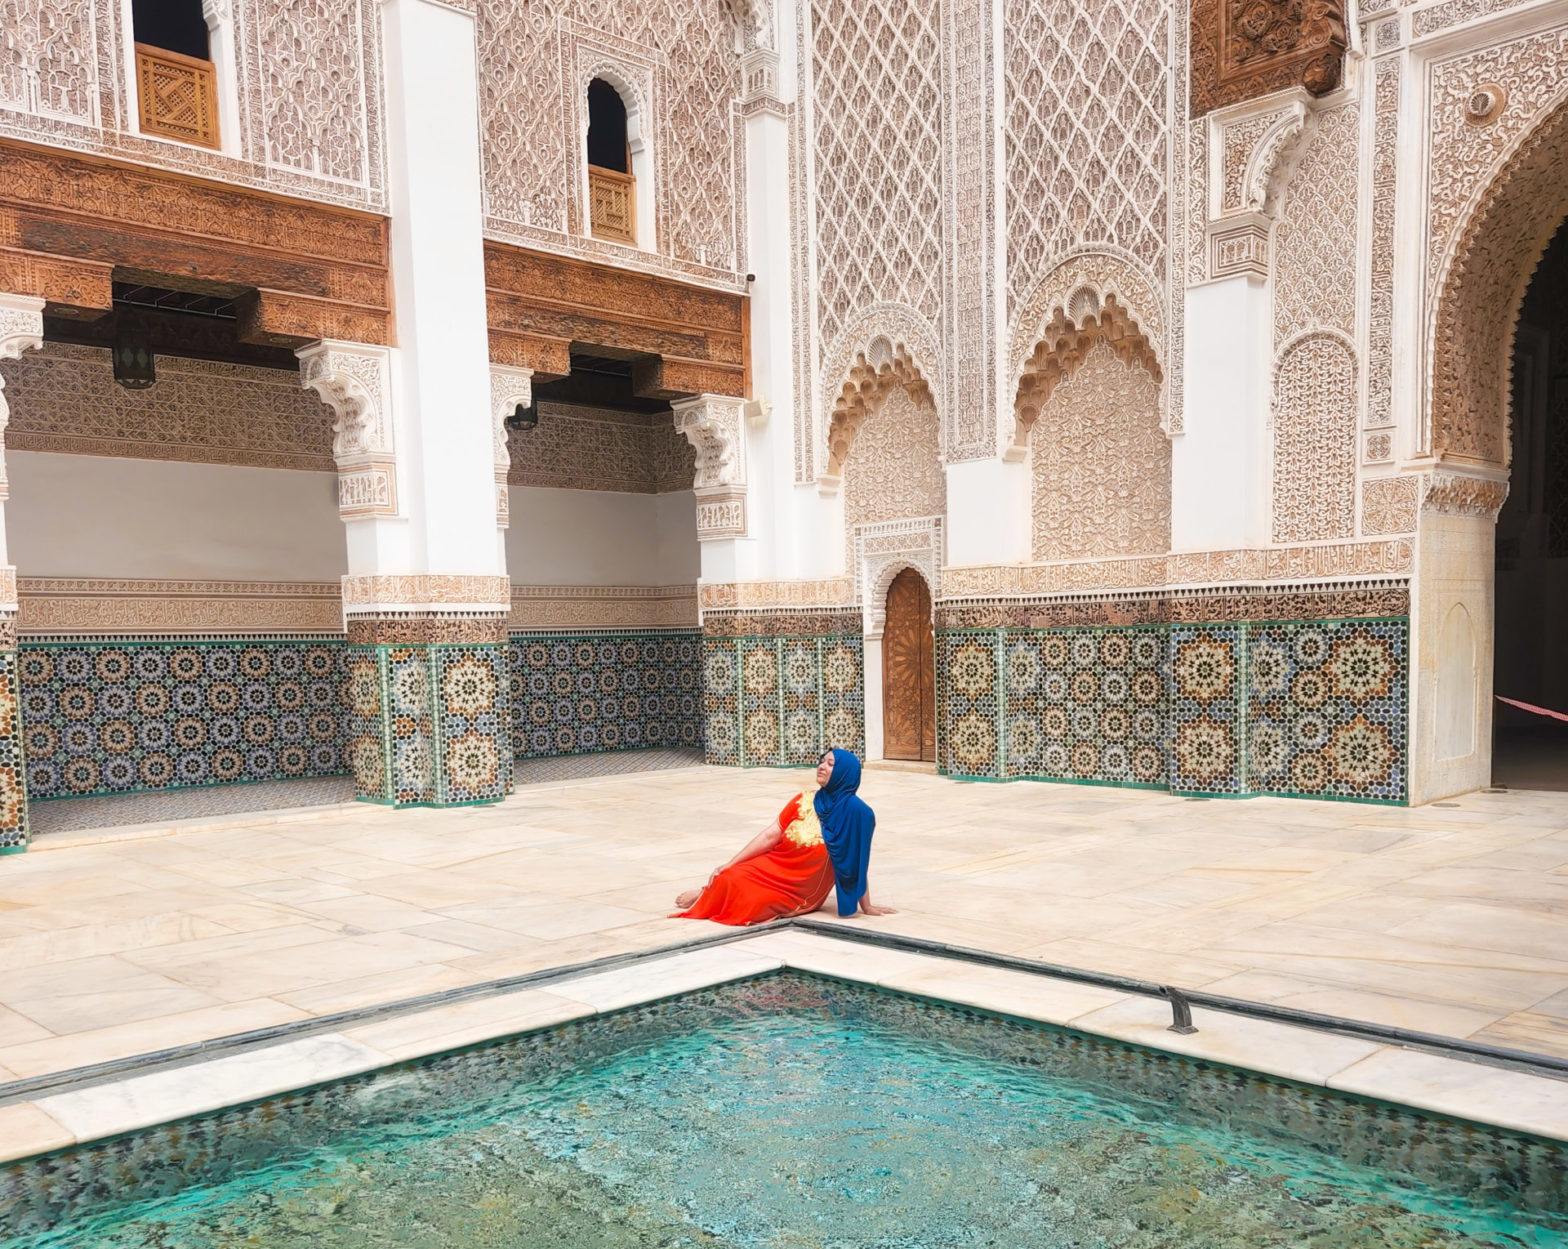 6 Of The Most Instagrammable Spots In Marrakech, Morocco